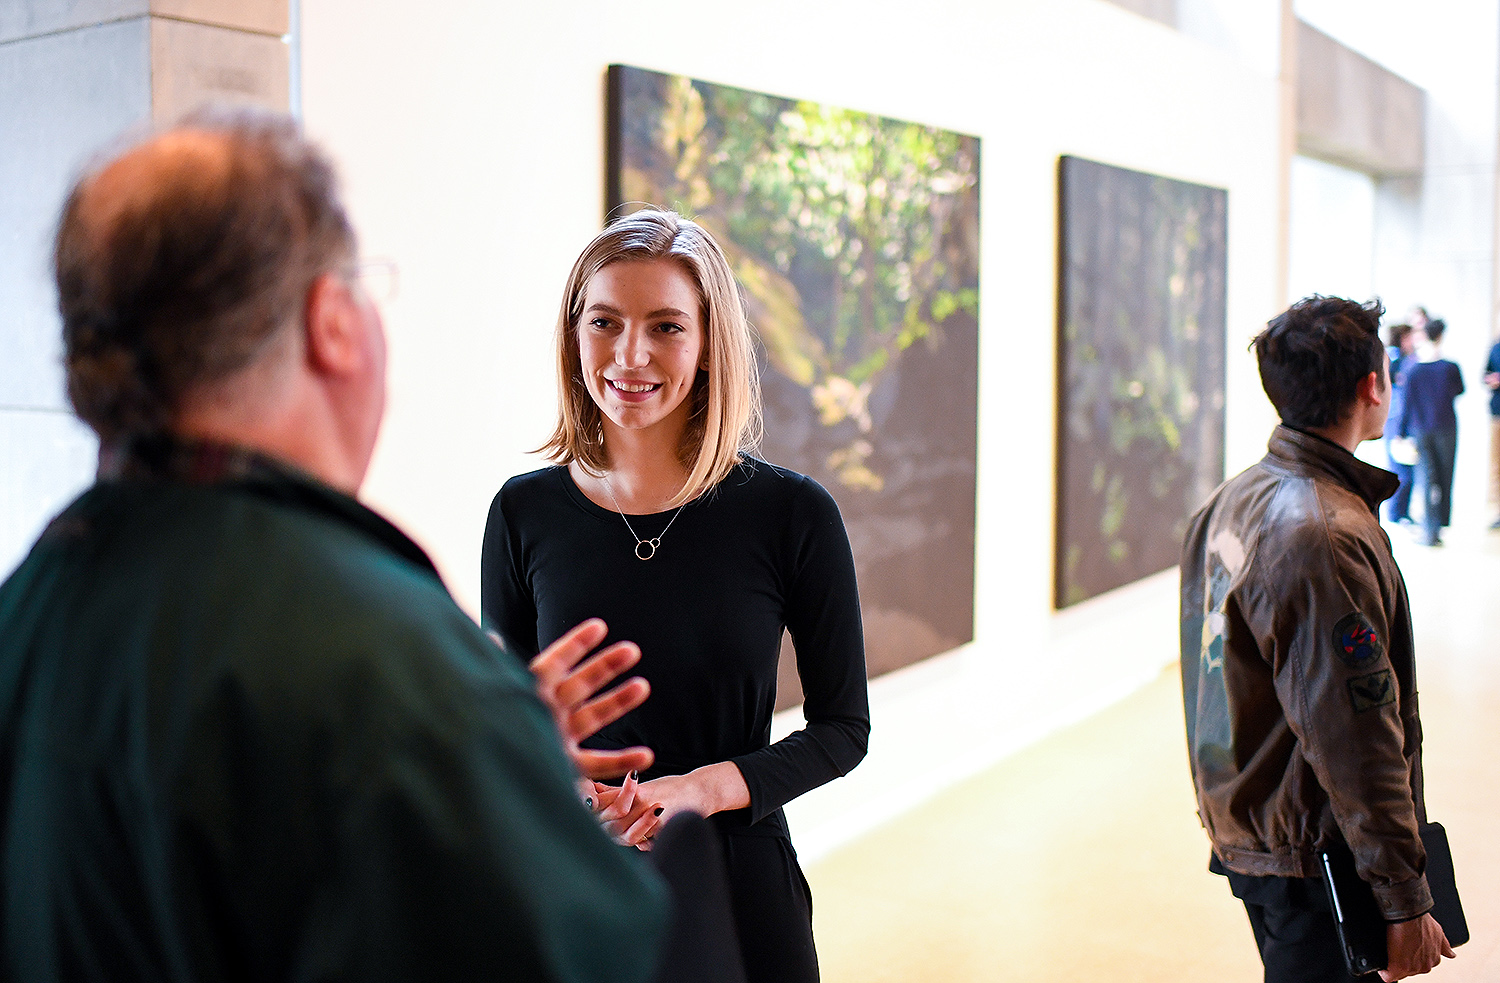 Virginia Johnson speaks to Professor Barry Chernoff about her work, "IMMERSIVE paintings."